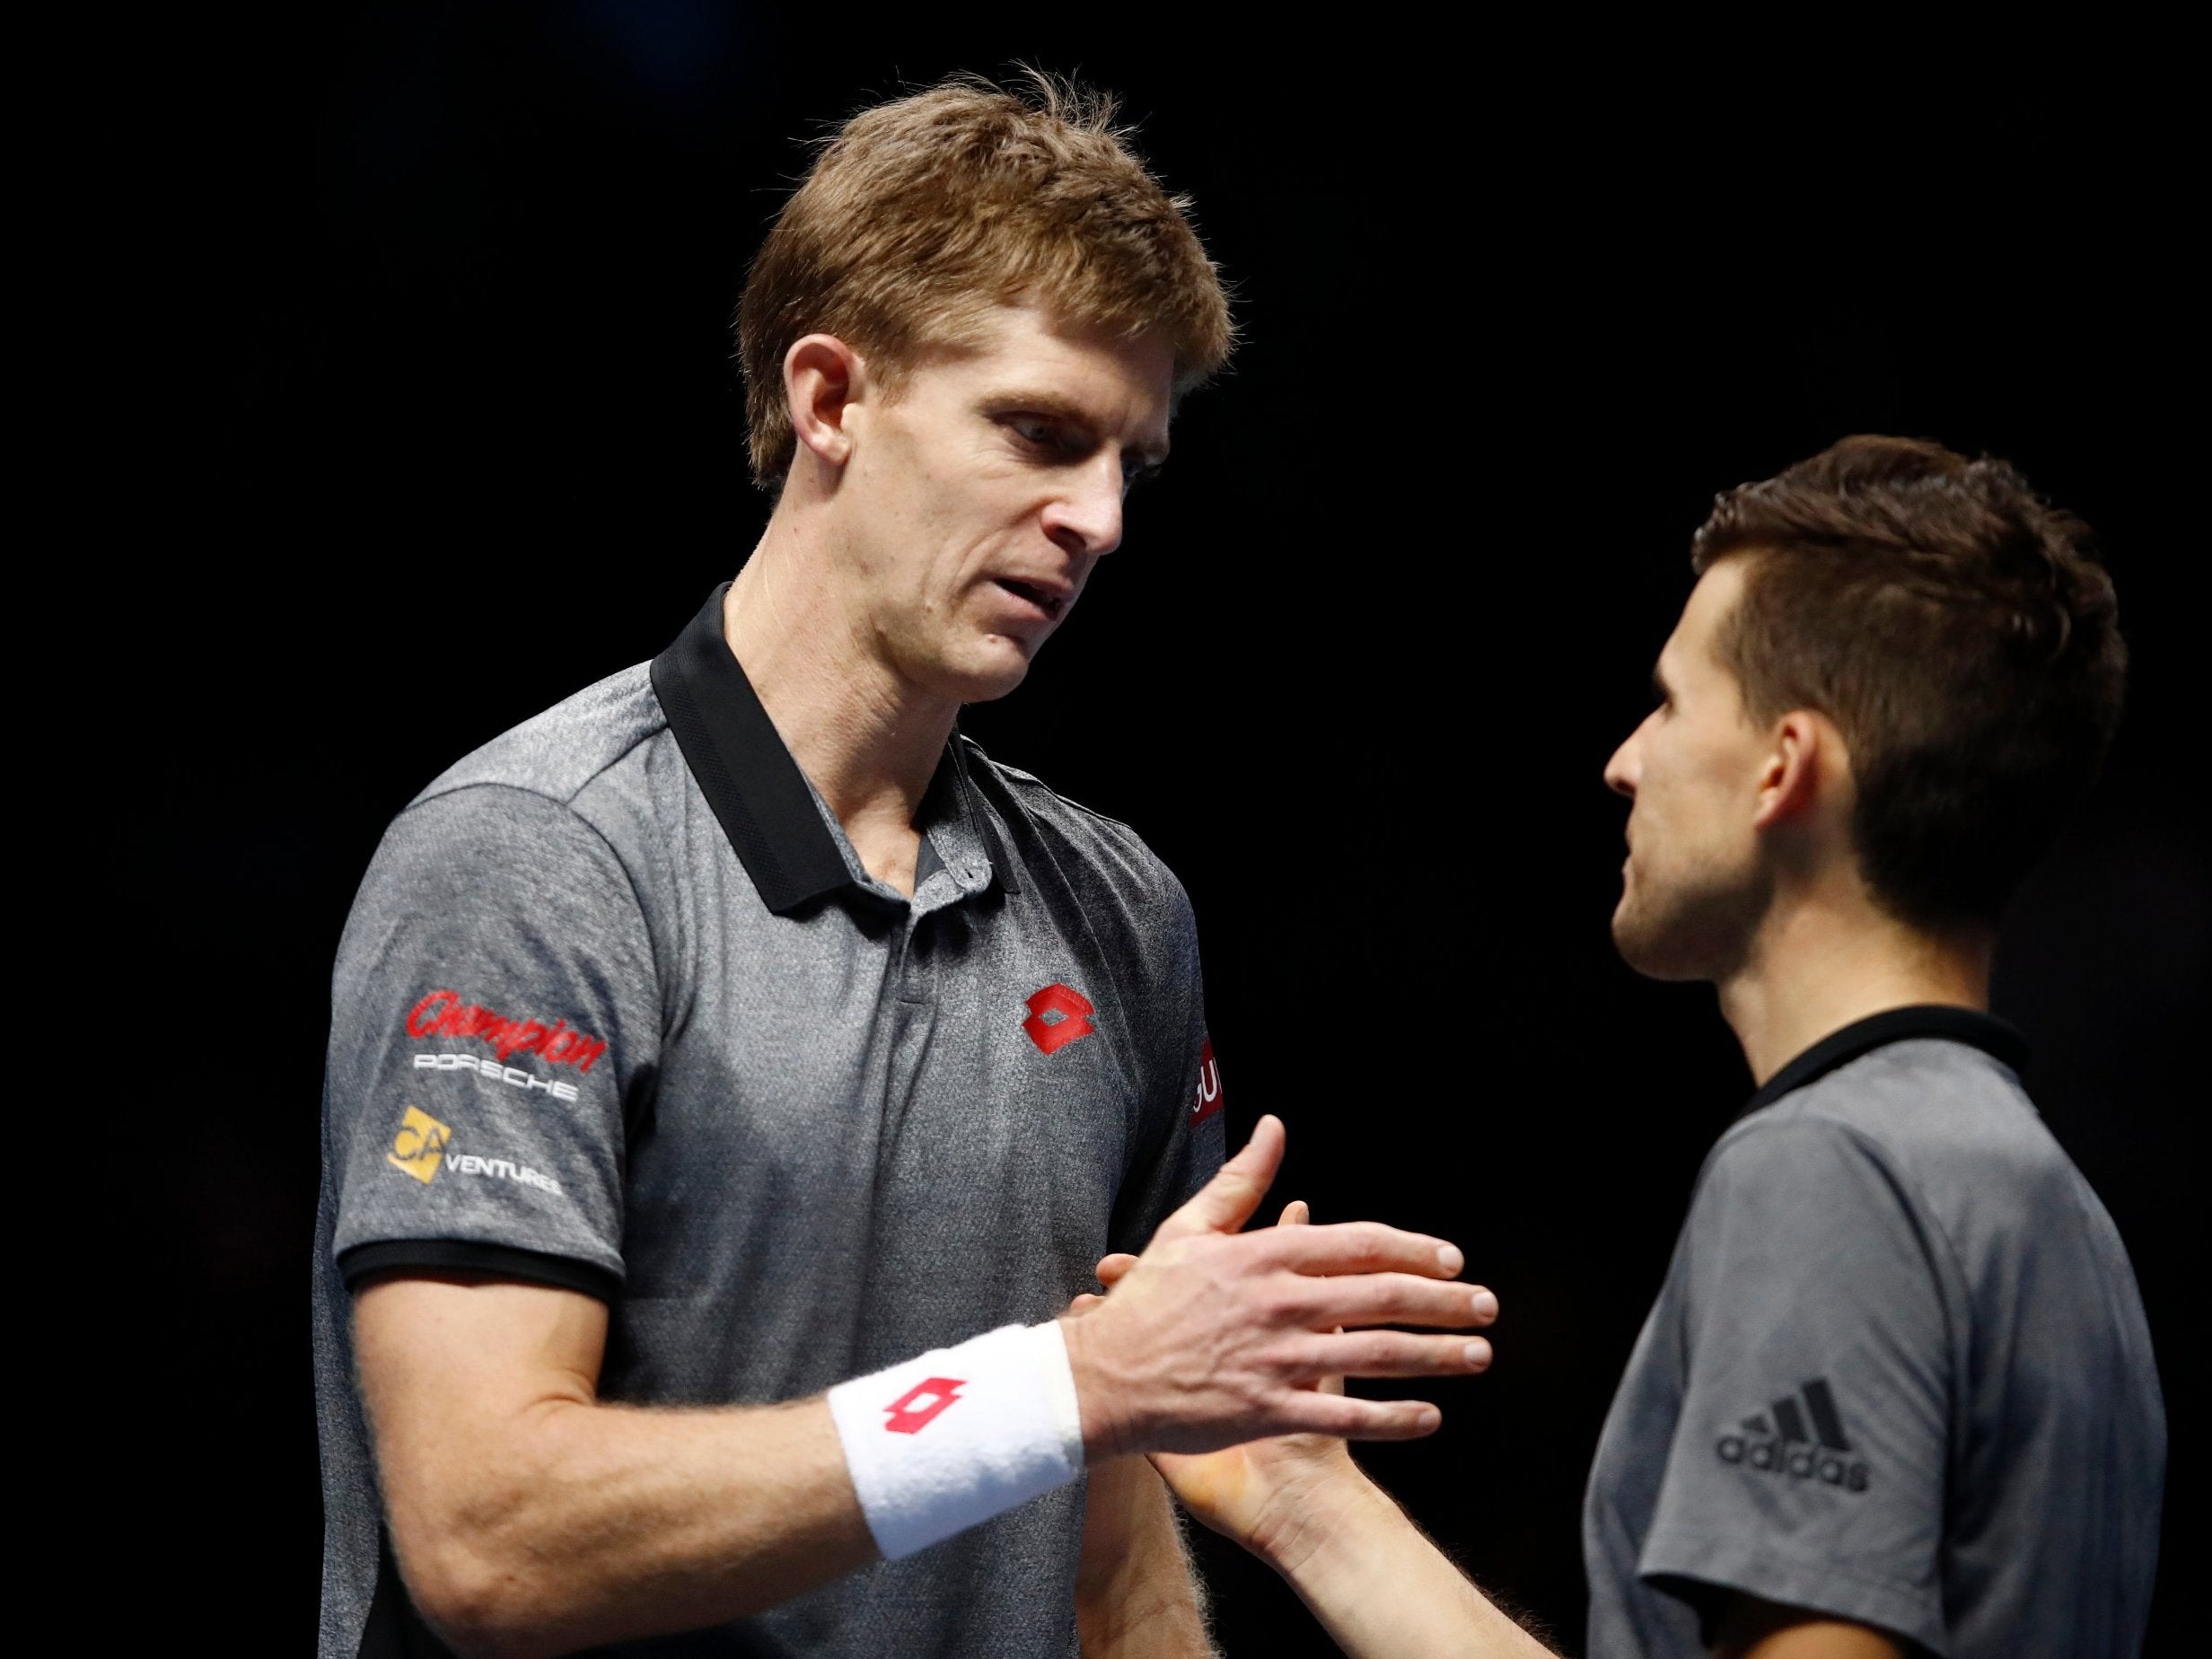 Kevin Anderson did not let nerves get the better of him